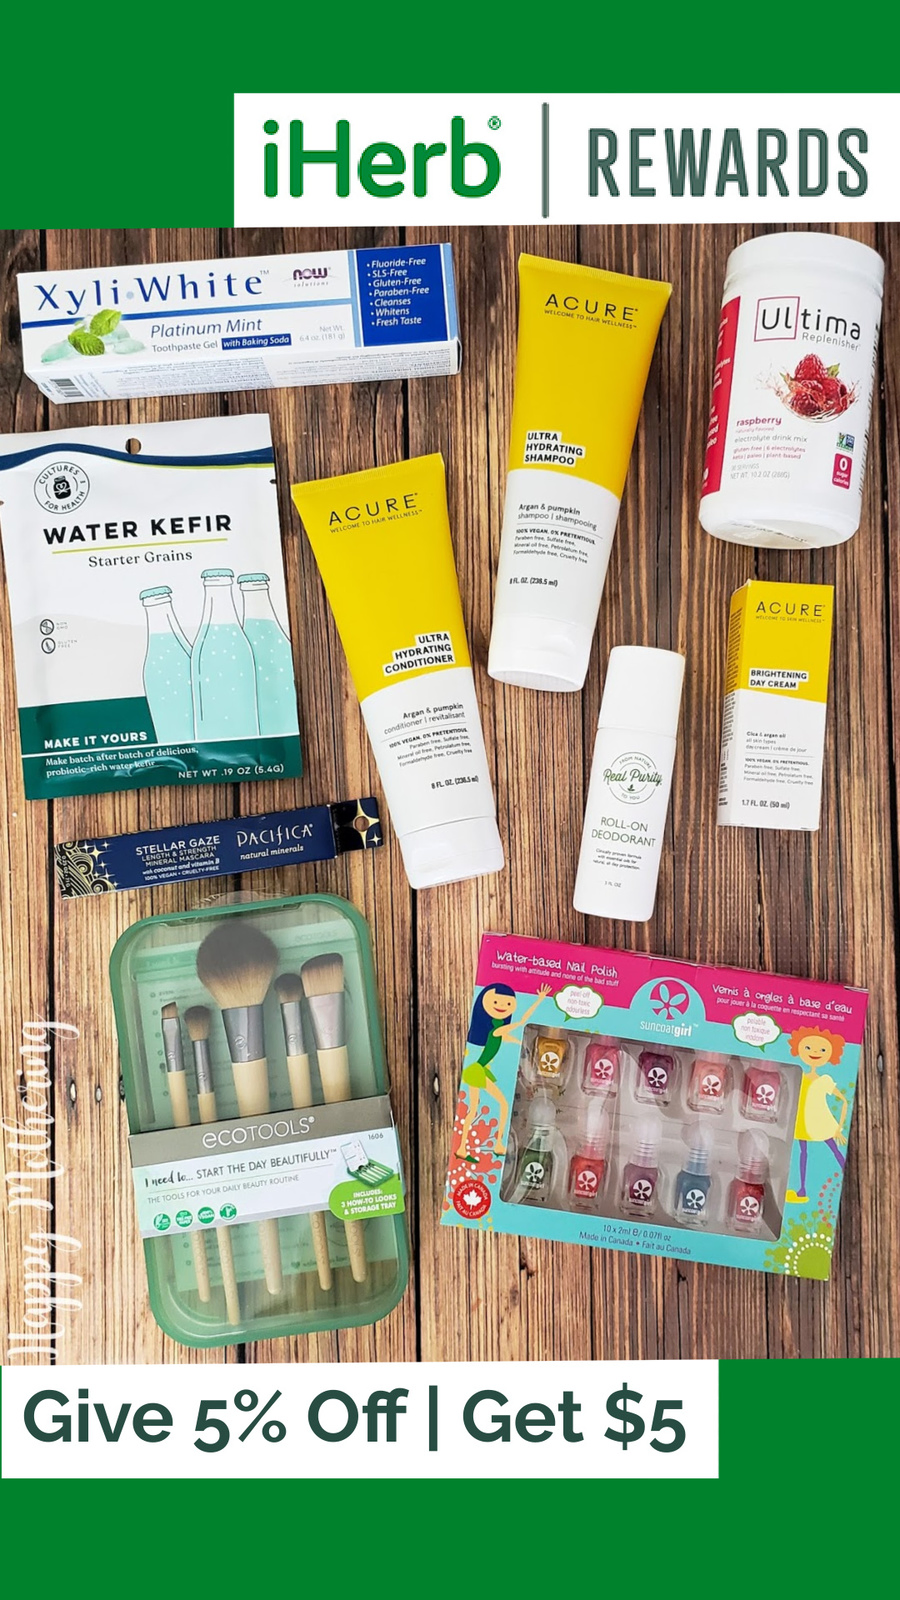 Overhead view of products purchased on the iHerb website with iHerb rewards logo and the words "Give 5% off, Get $5" printed on a green background.